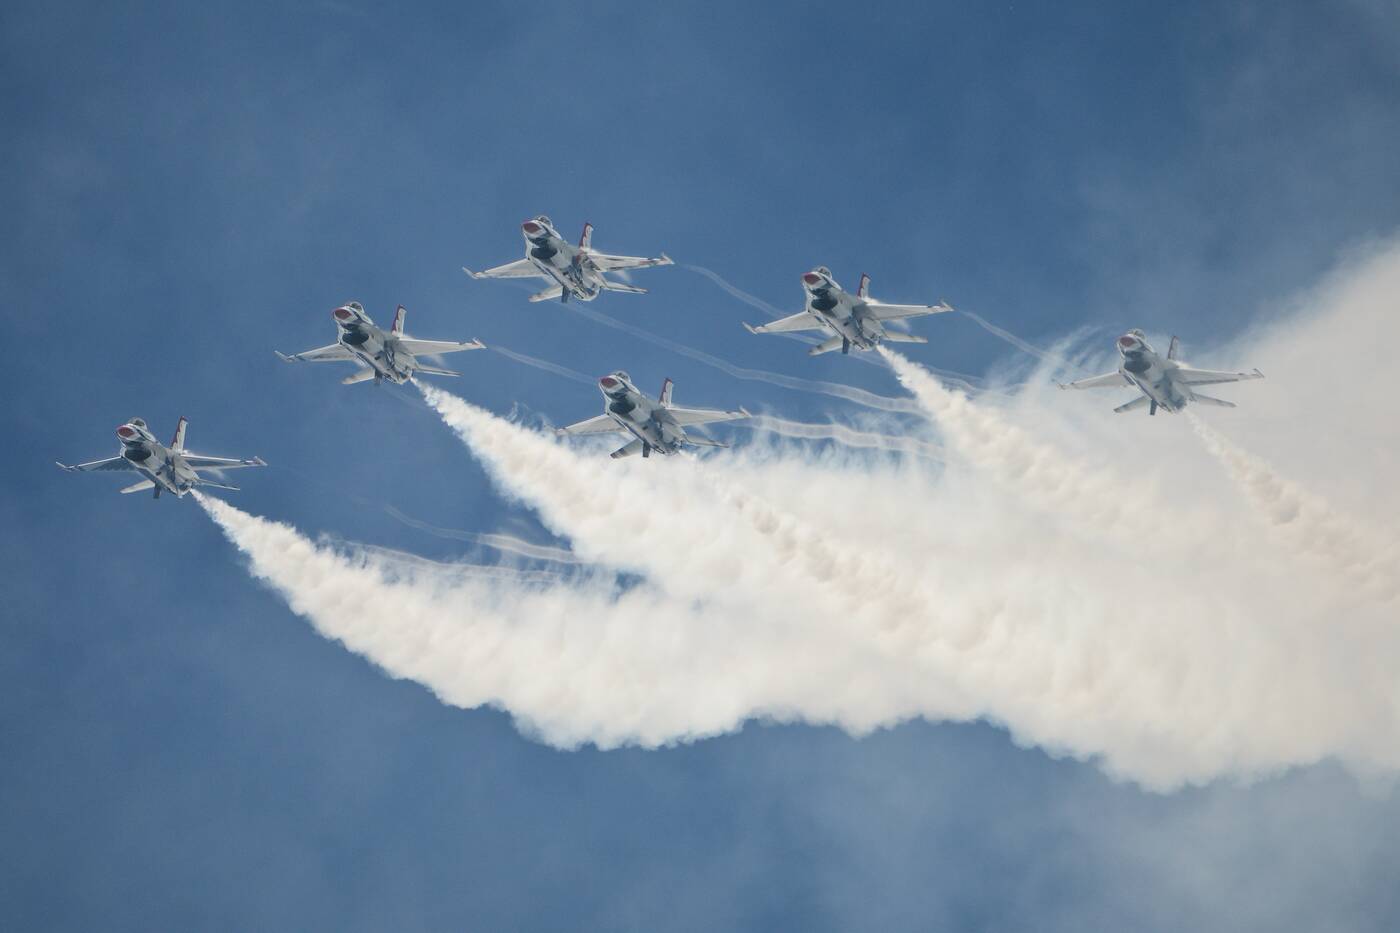 The Toronto Air Show thrills high above the CNE